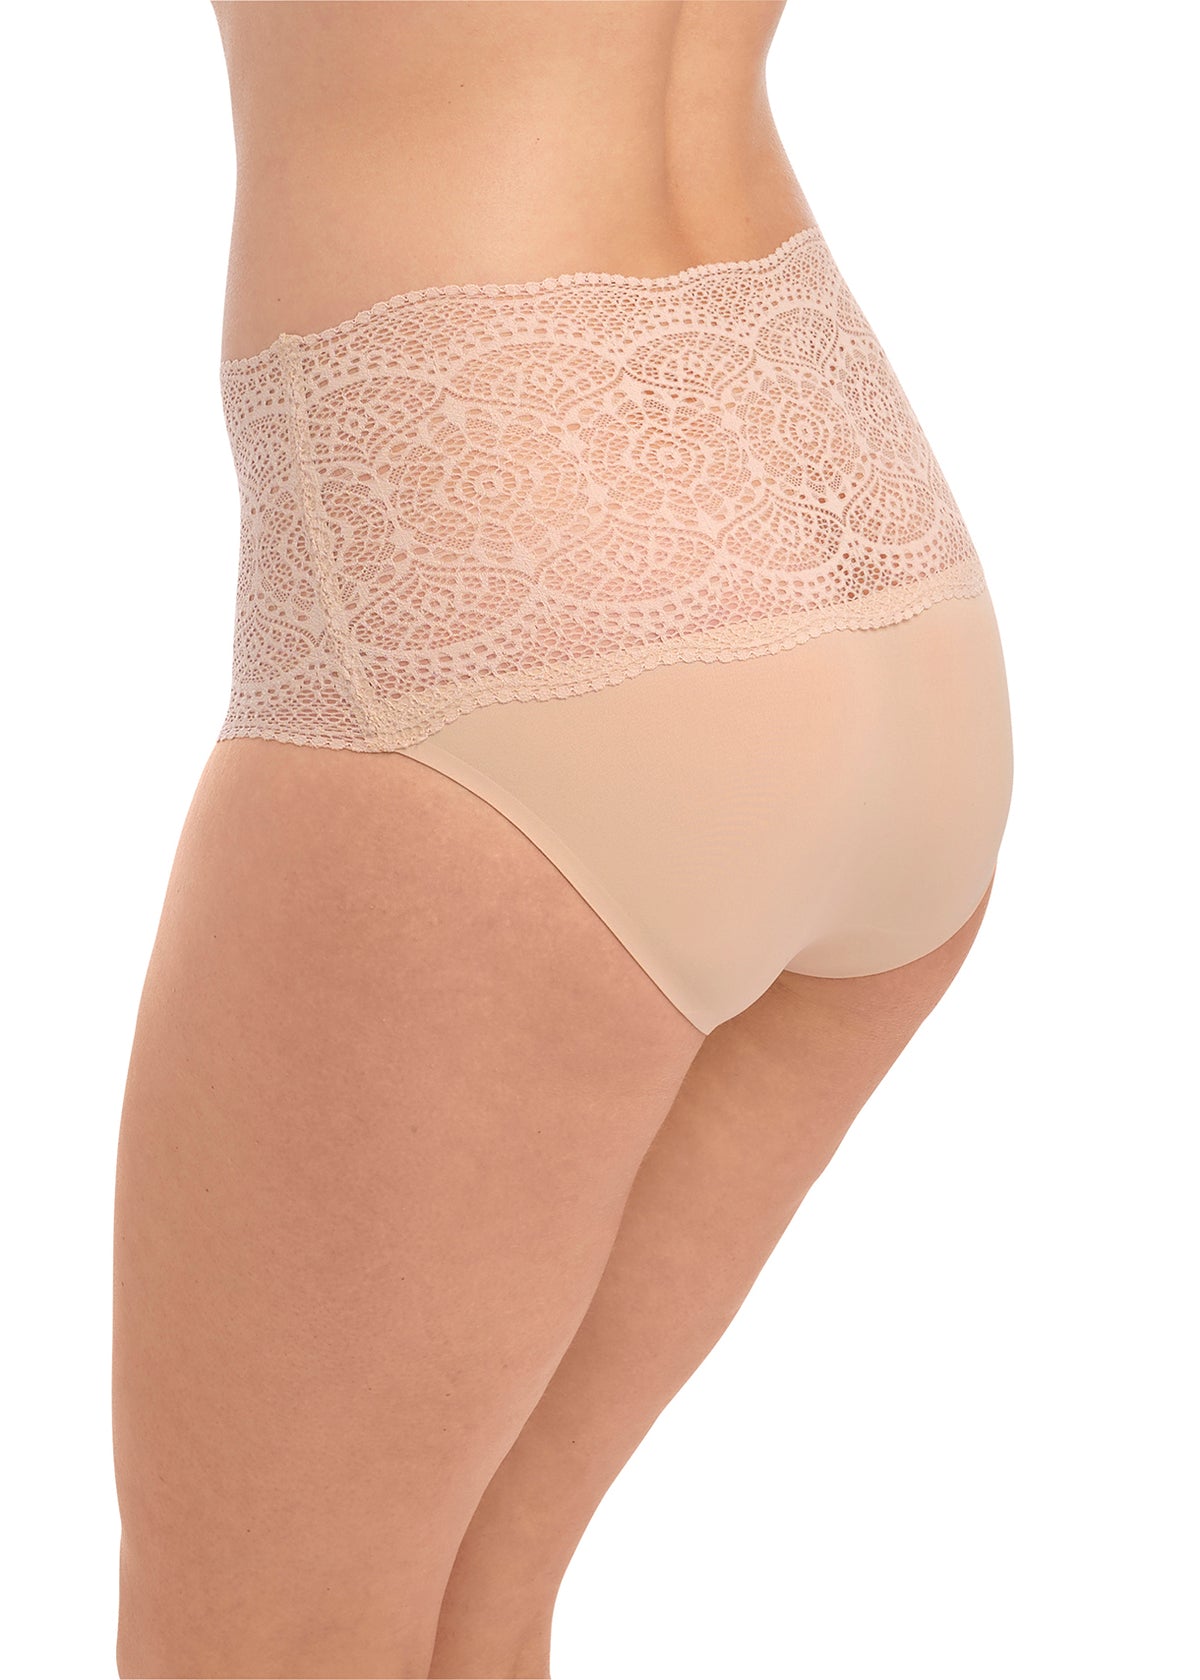 Fantasie Lace Ease Smooth Stretch Lace Natural Briefs